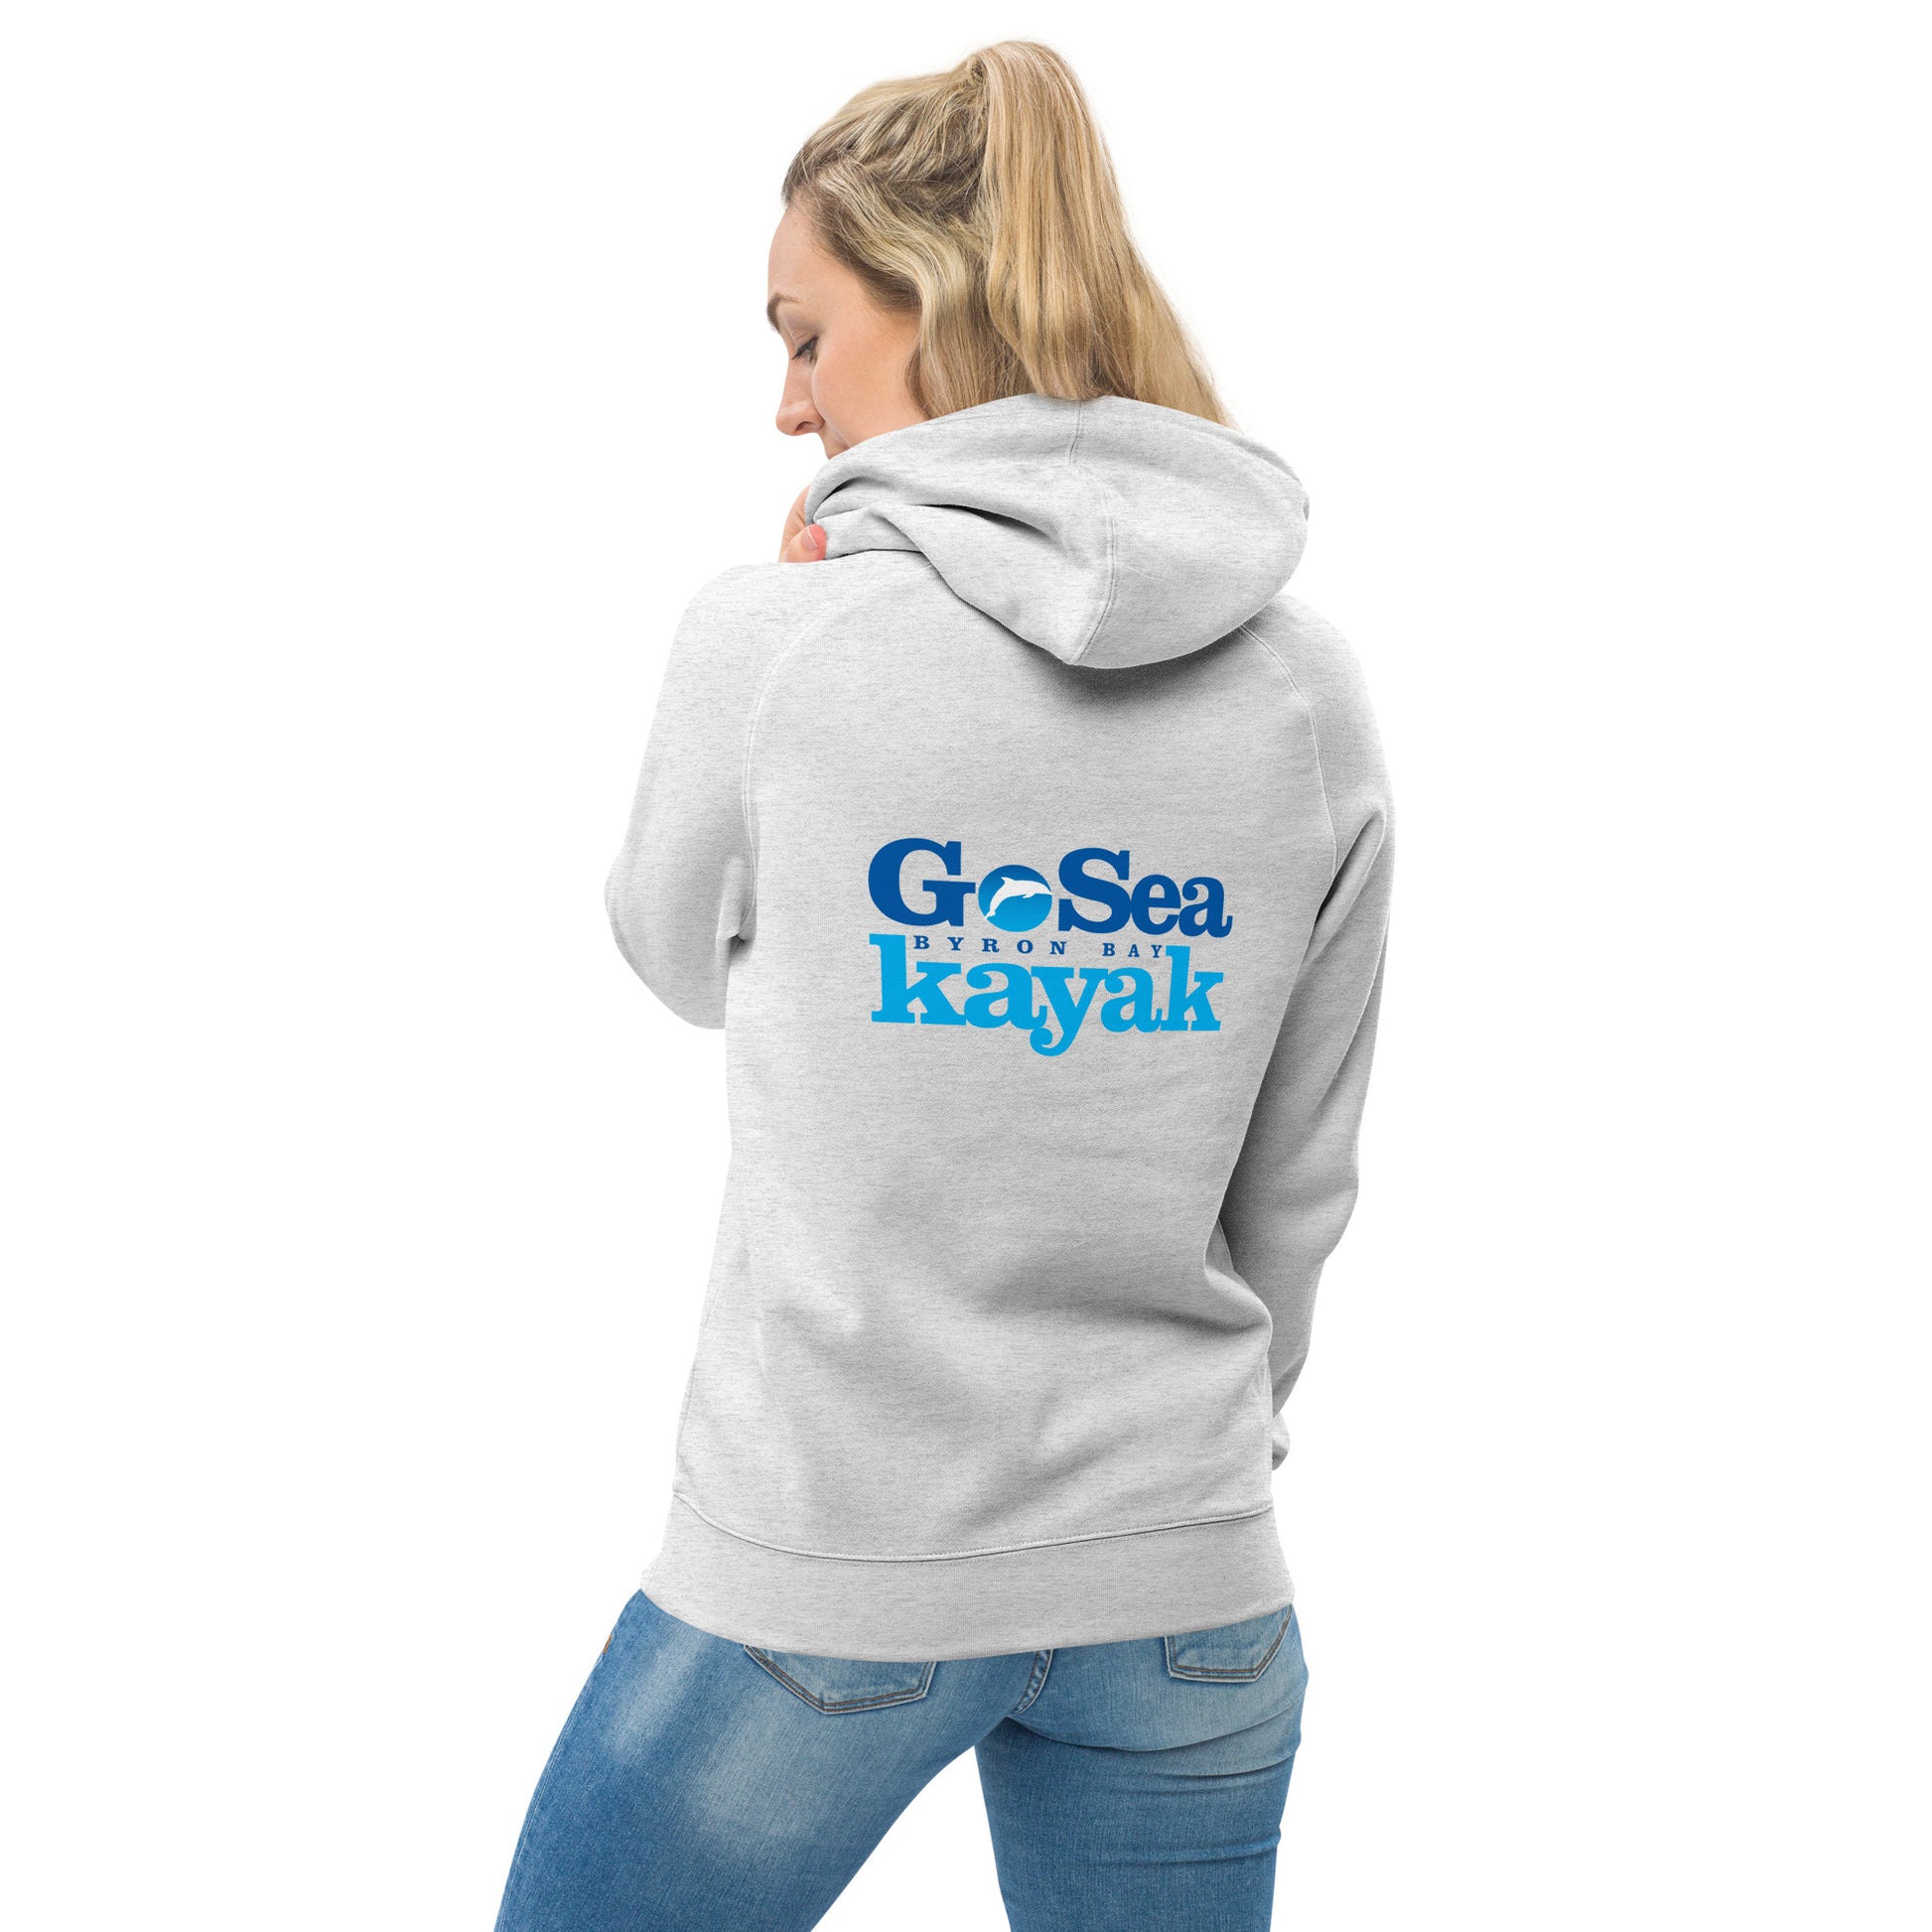  Unisex Hoodie - White Marle / light grey - Back view being warn by woman  - Go Sea Kayak Byron Bay logo on back and front, Kangaroo pocket on front - Genuine Byron Bay Merchandise | Produced by Go Sea Kayak Byron Bay 